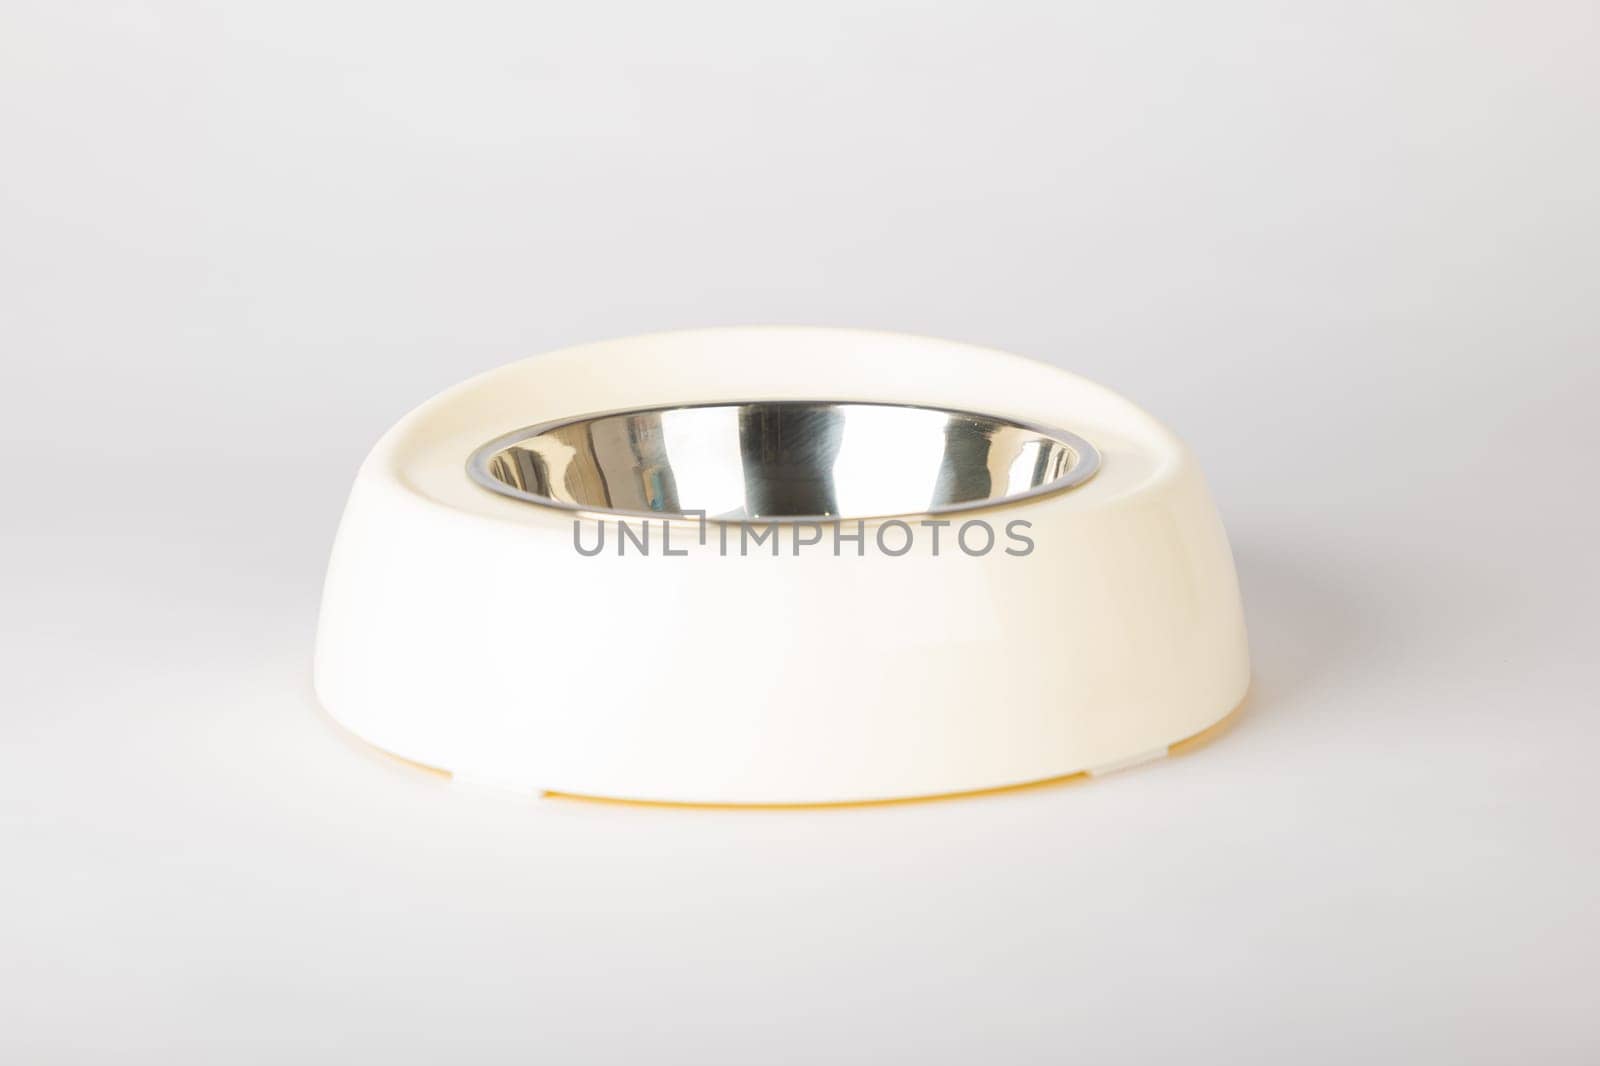 An isolated pet bowl for cat and dog on a clean white background. This circular, metallic tray in a sleek design is perfect for serving their meals and water, promoting animal care.